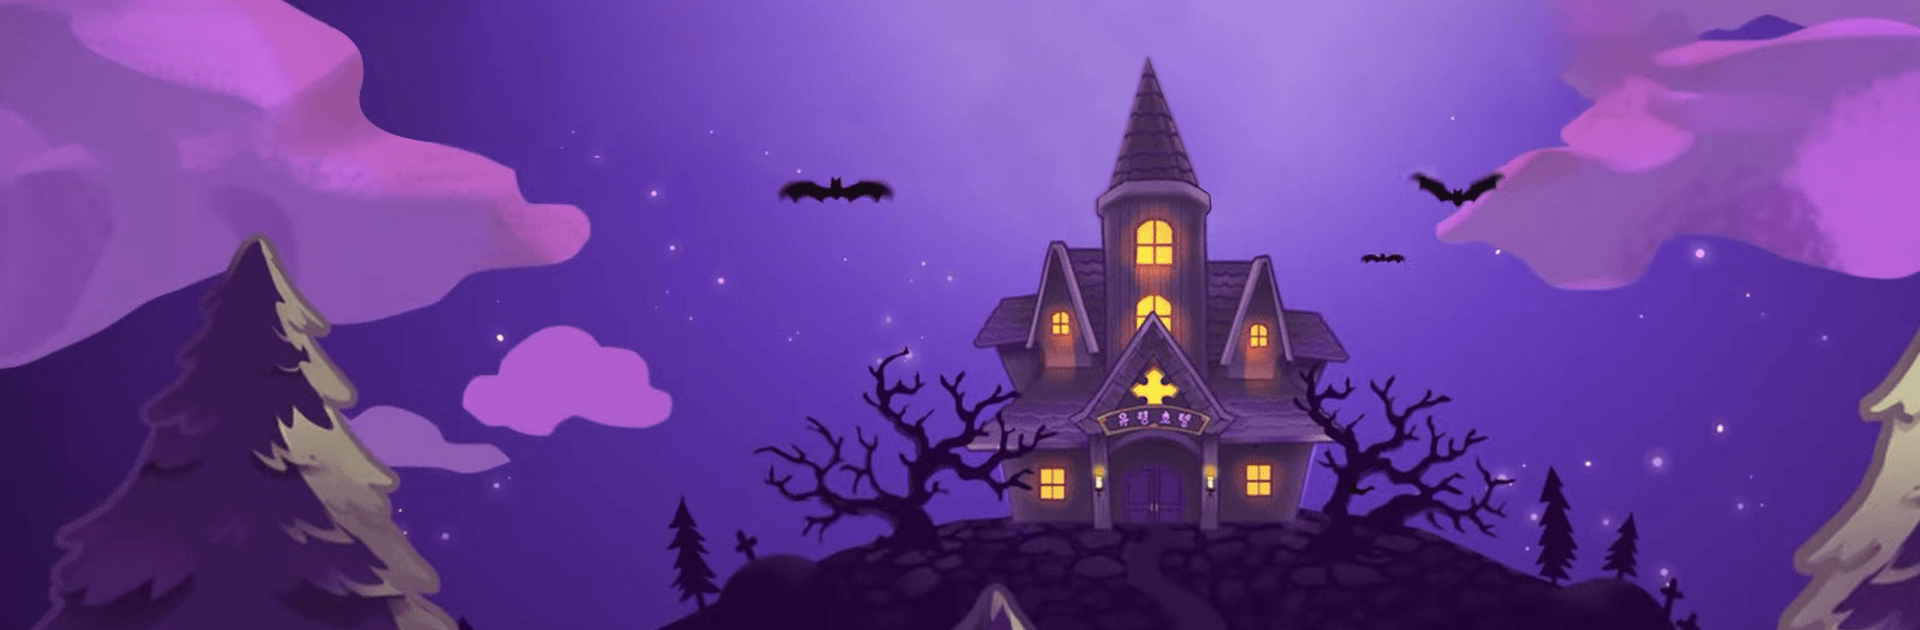 Idle Ghost Hotel - Tycoon Game